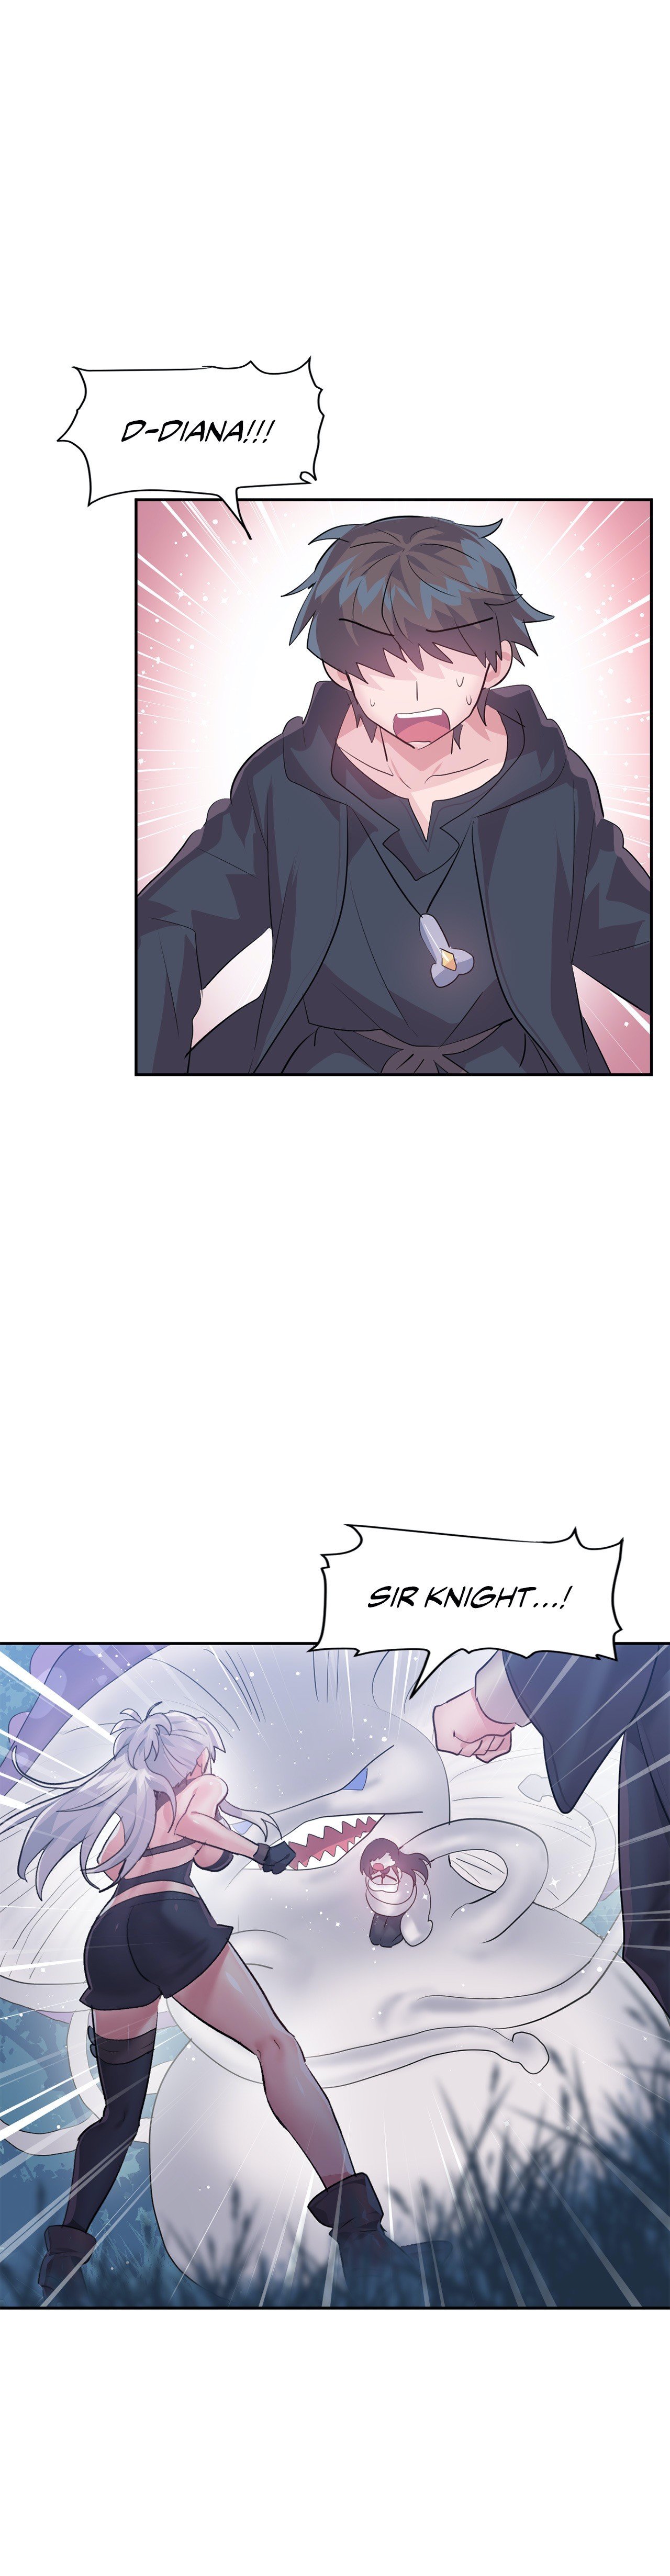 log-in-to-lust-a-land-chap-38-2